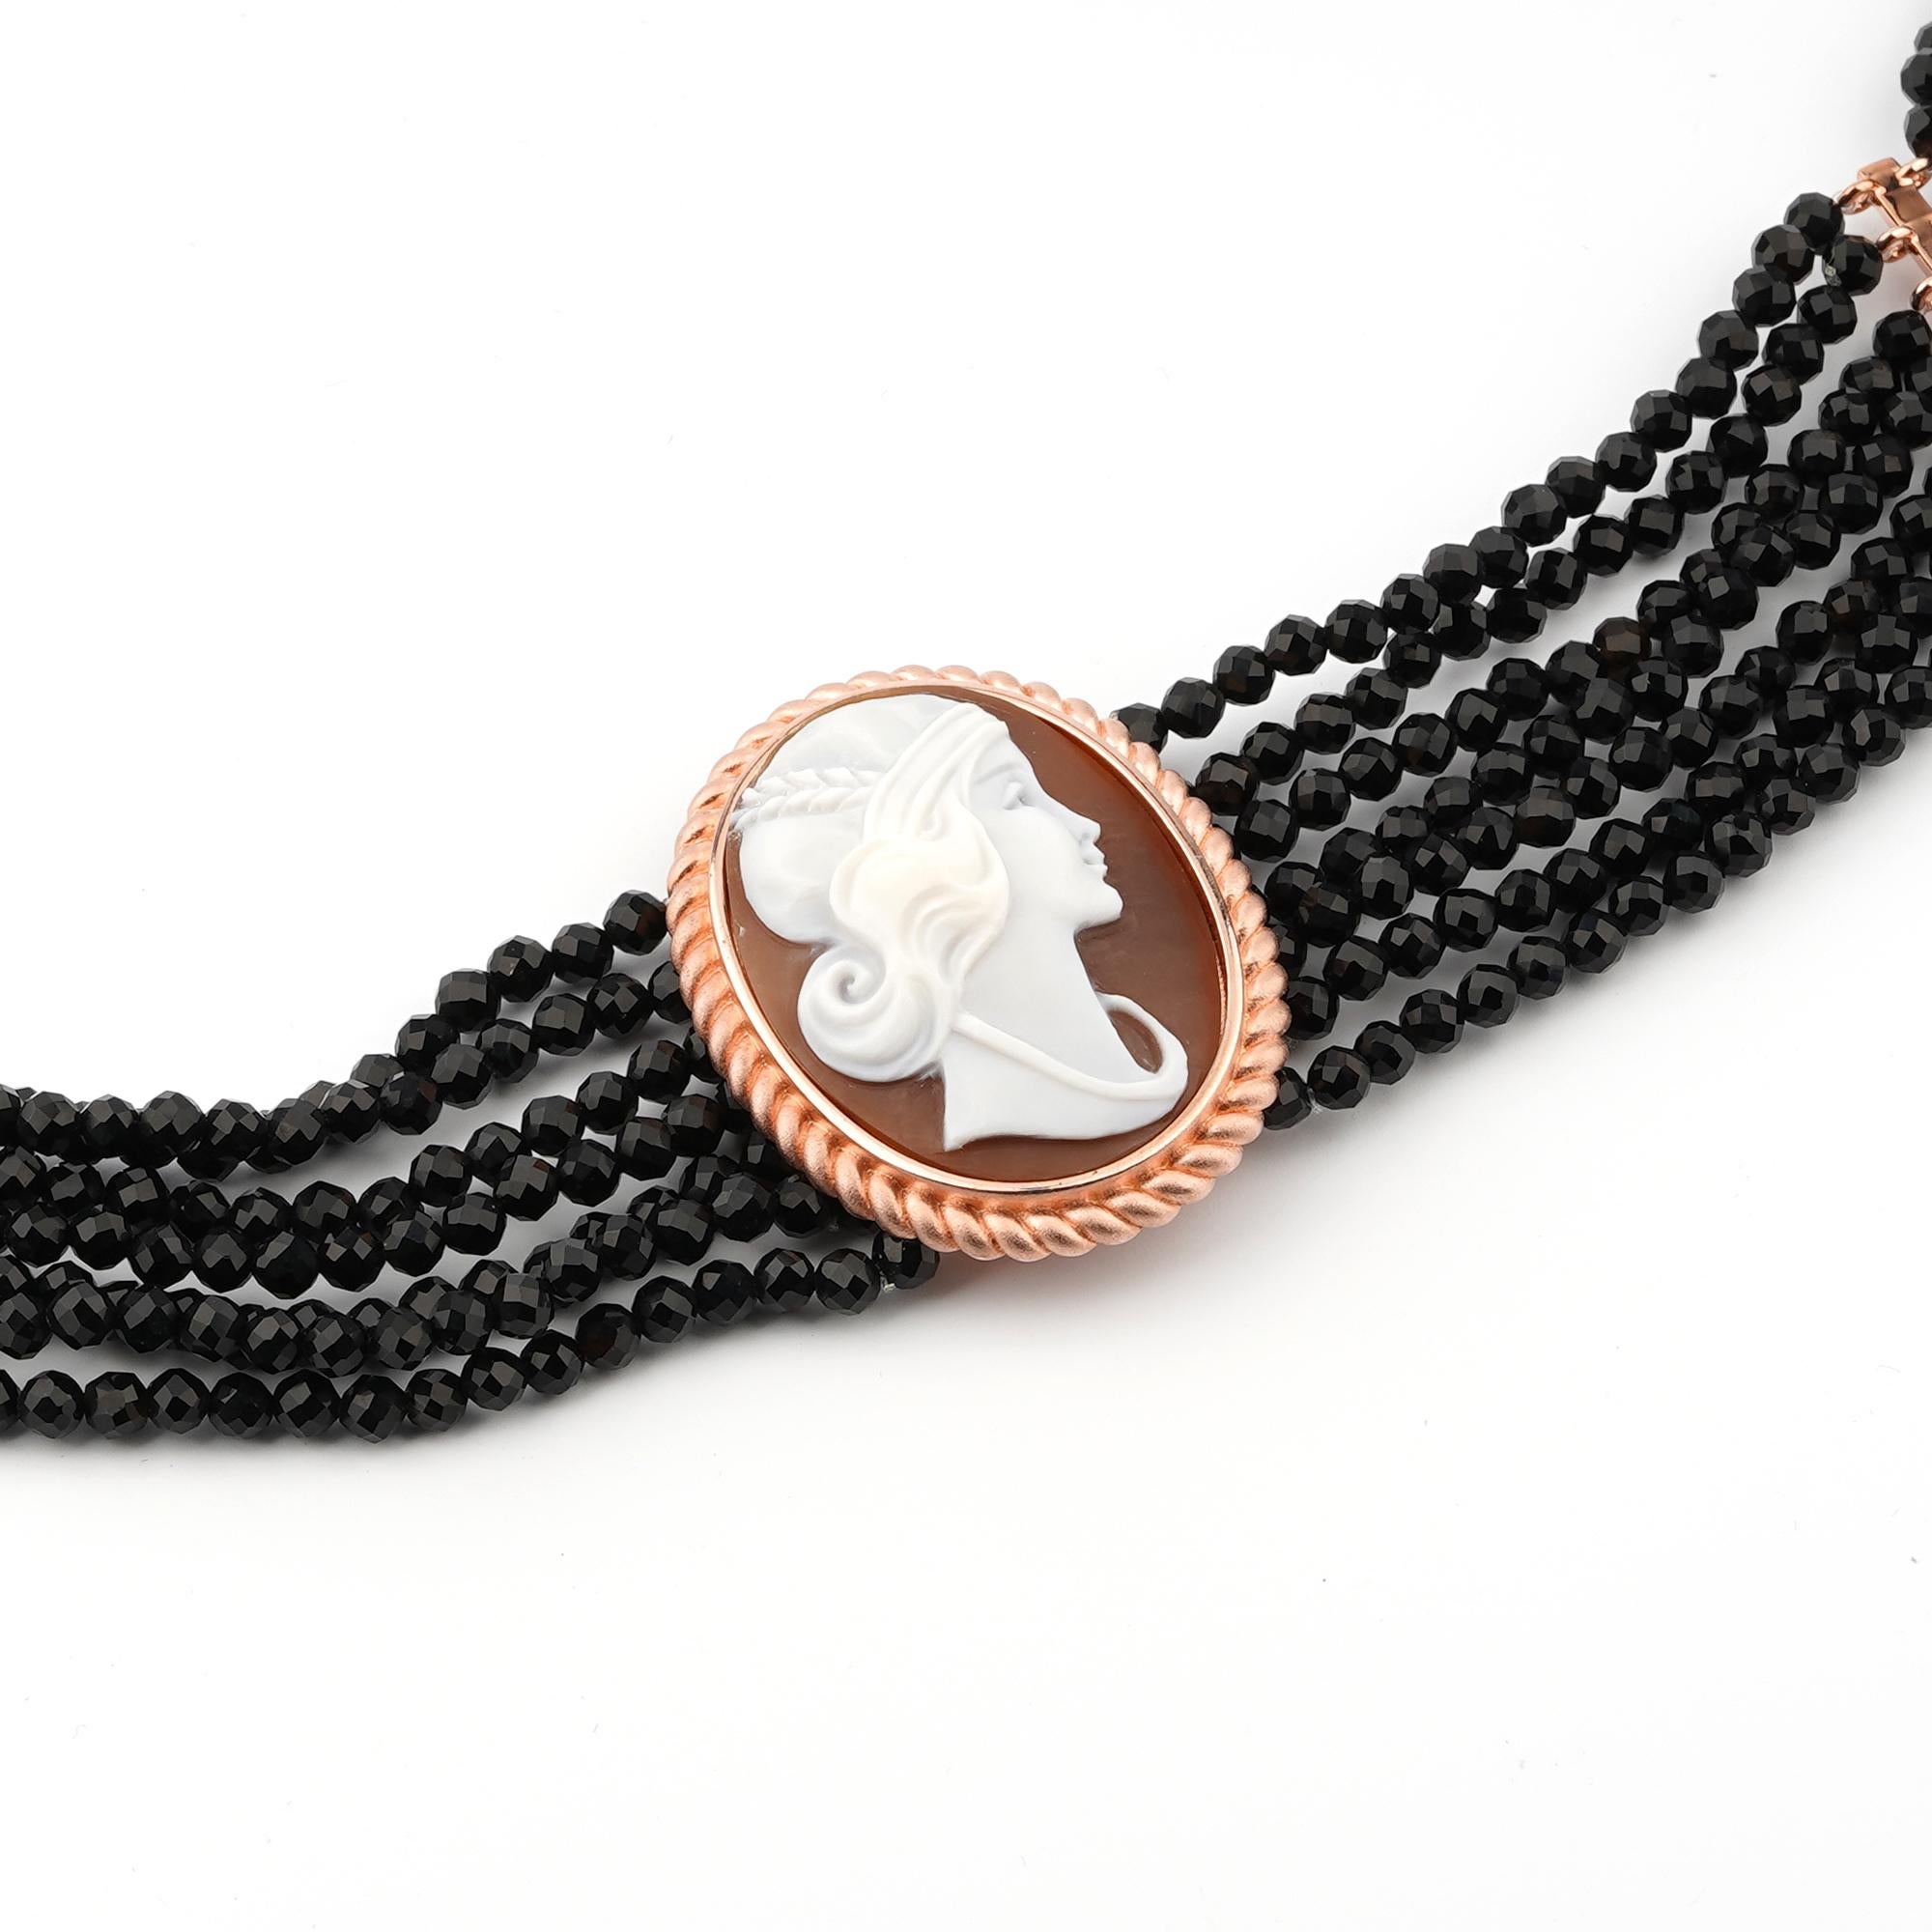 18 carat Rose Gold Plated 925 Sterling Silver with 38mm Sea Shell Cameo Necklace. Fully handcarved Portrait on a sea shell cameo set in a 18kt Rose Gold plated silver Chocker Necklace with Black Onyx. Carvings are performed by our master artisans